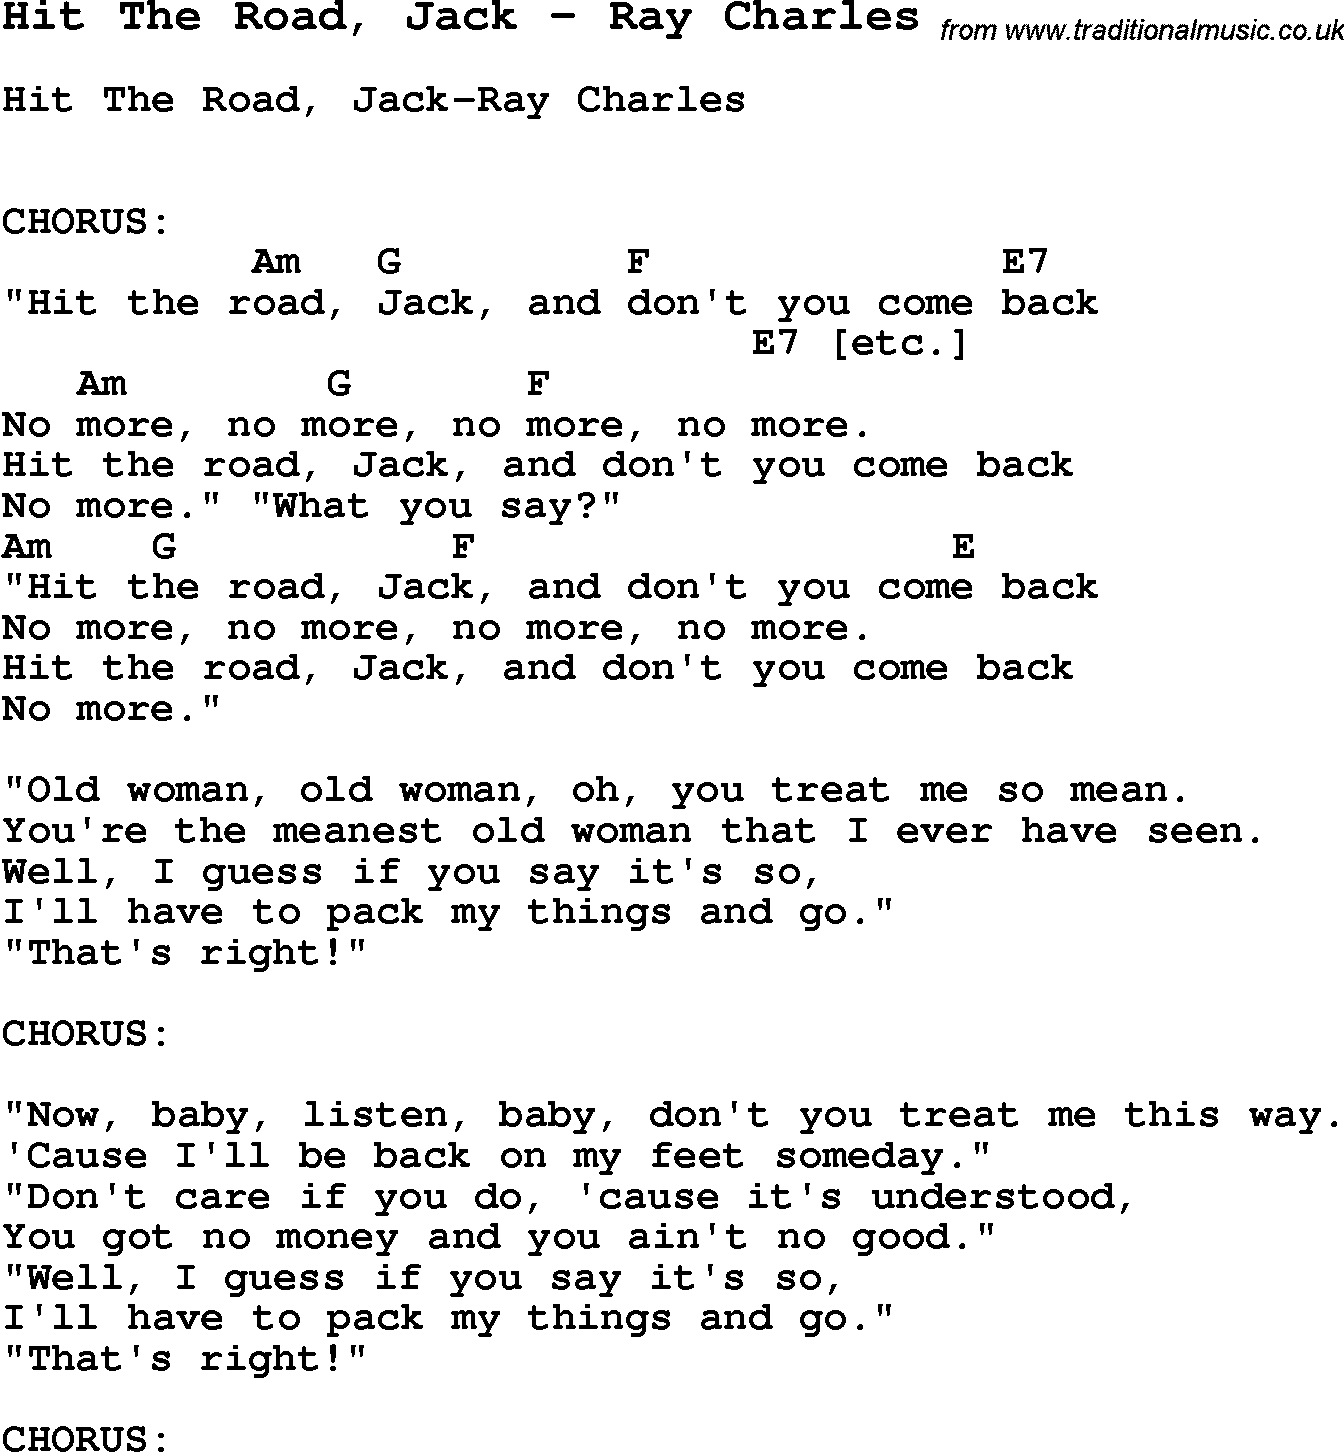 Song Hit The Road, Jack by Ray Charles, with lyrics for vocal performance and accompaniment chords for Ukulele, Guitar Banjo etc.